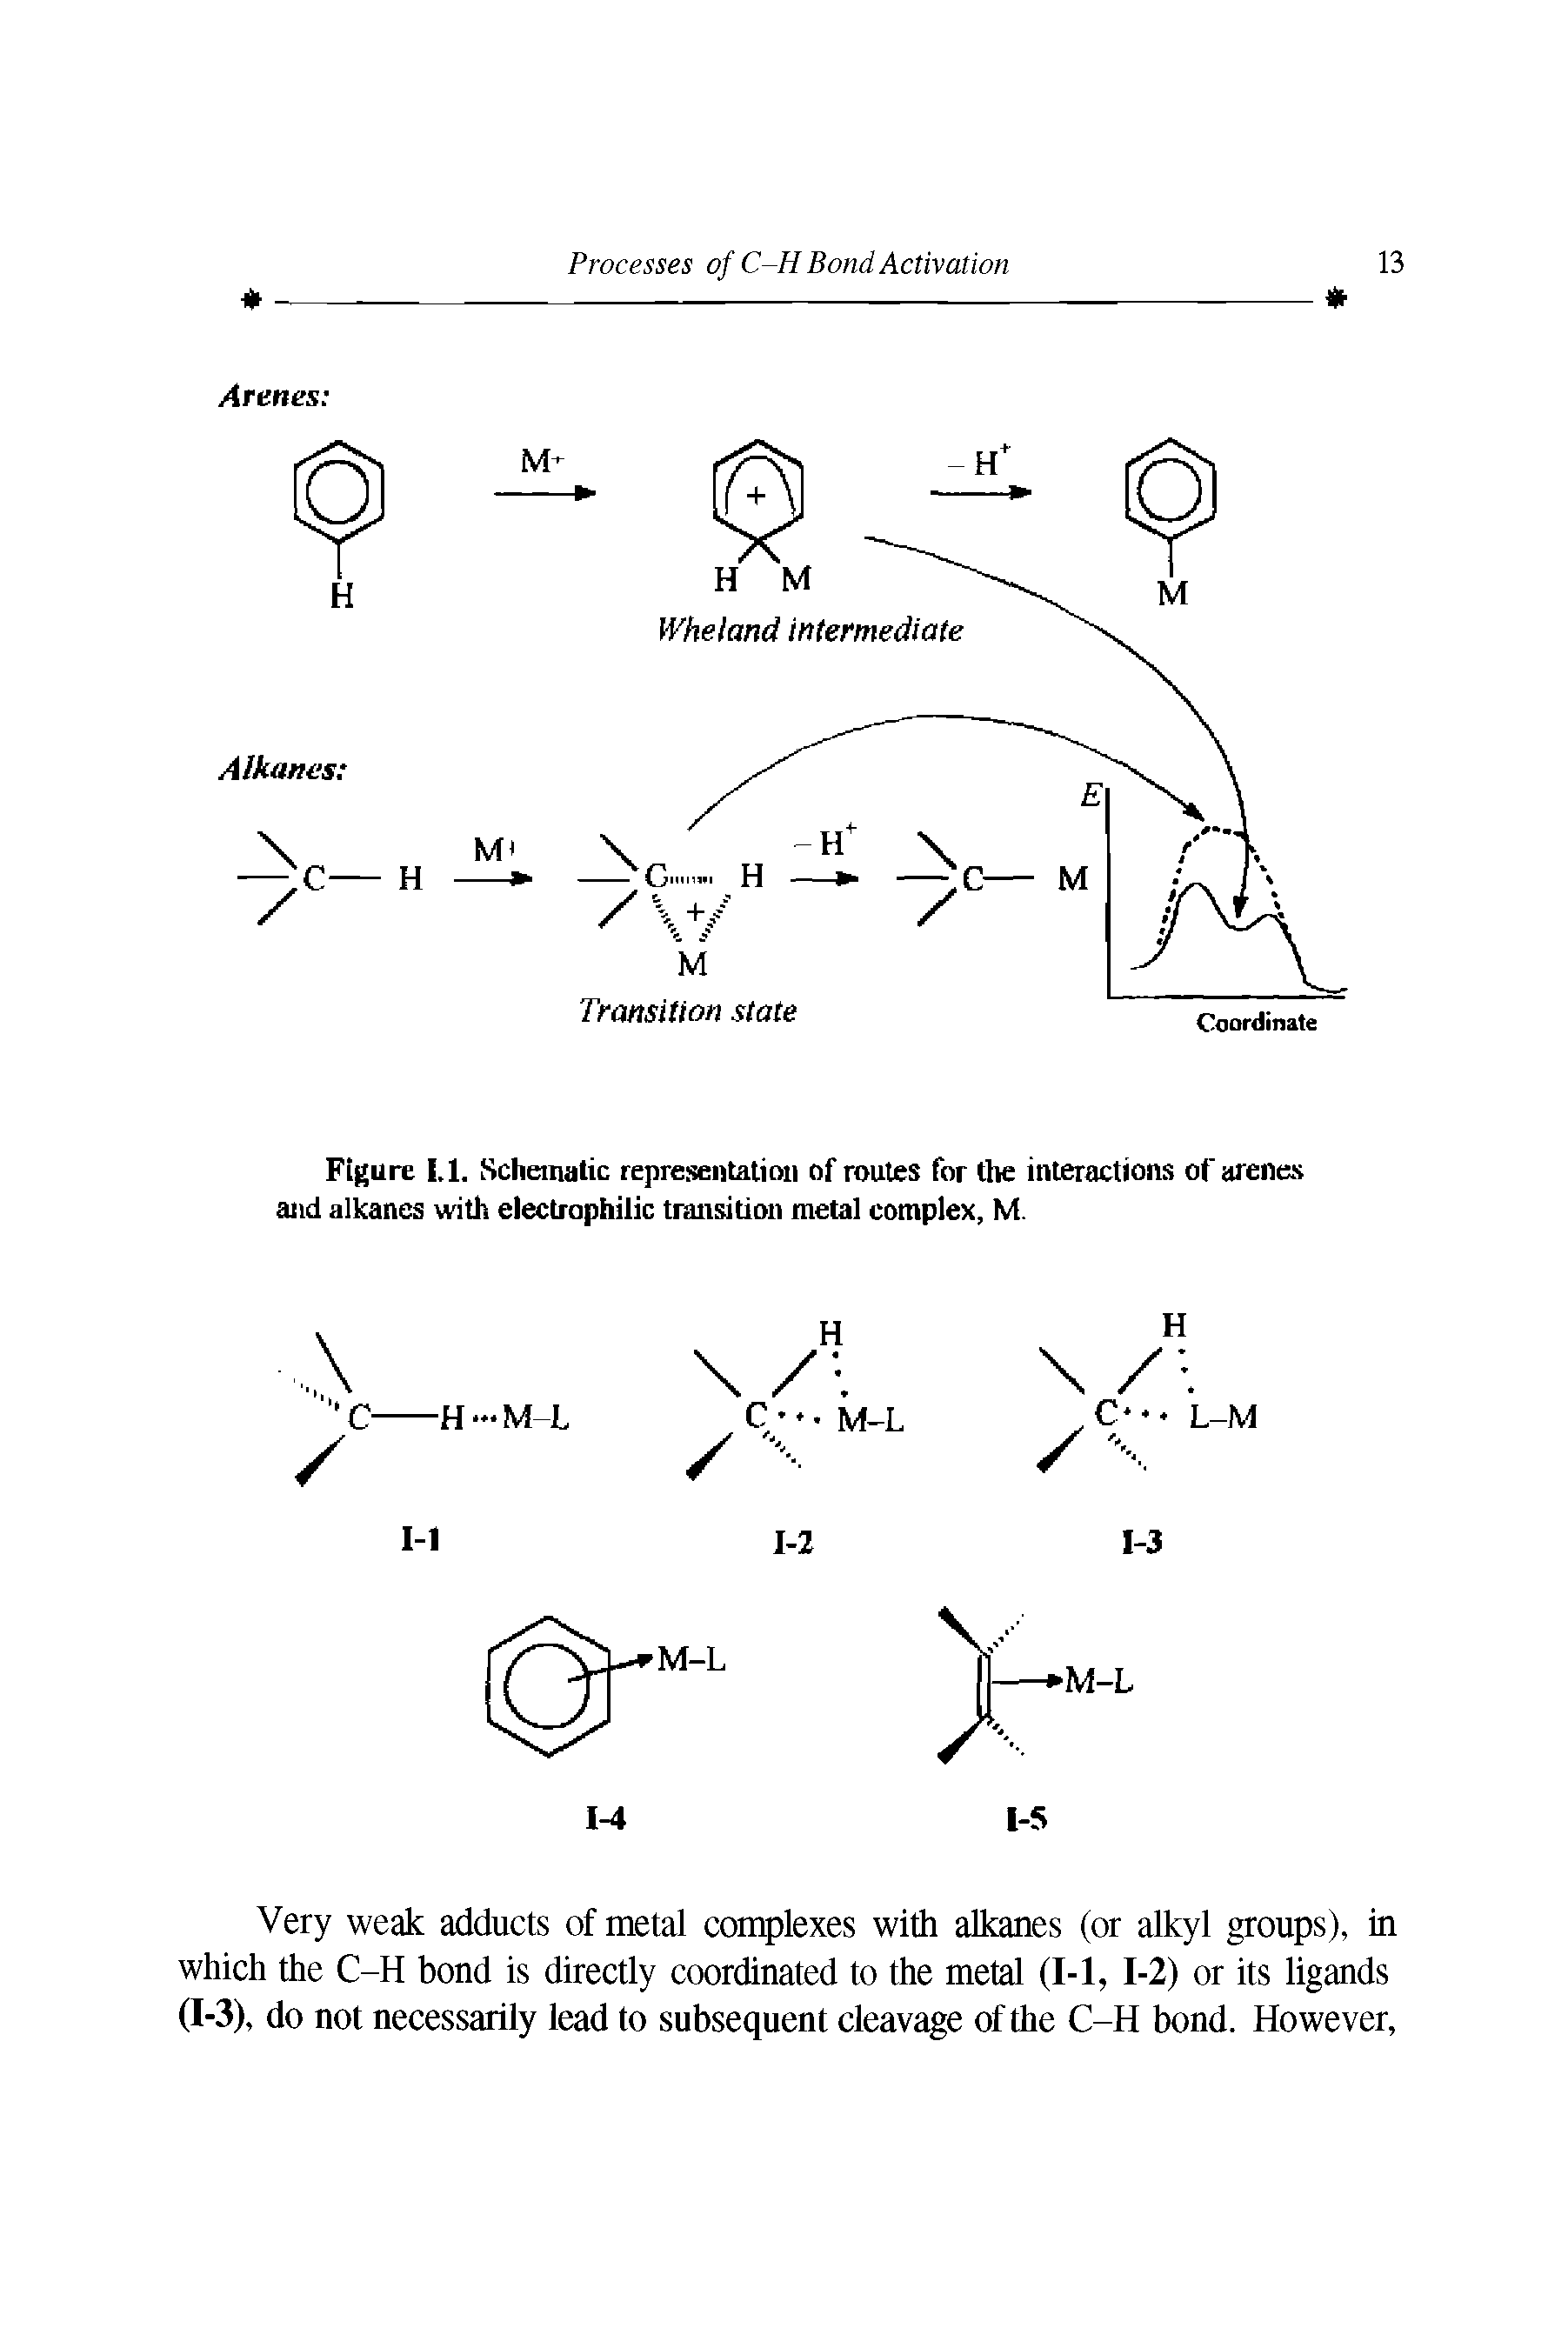 Figure I.l. Schematic representation of routes for the interactions of arenes and alkanes with electrophilic transition metal complex, M.